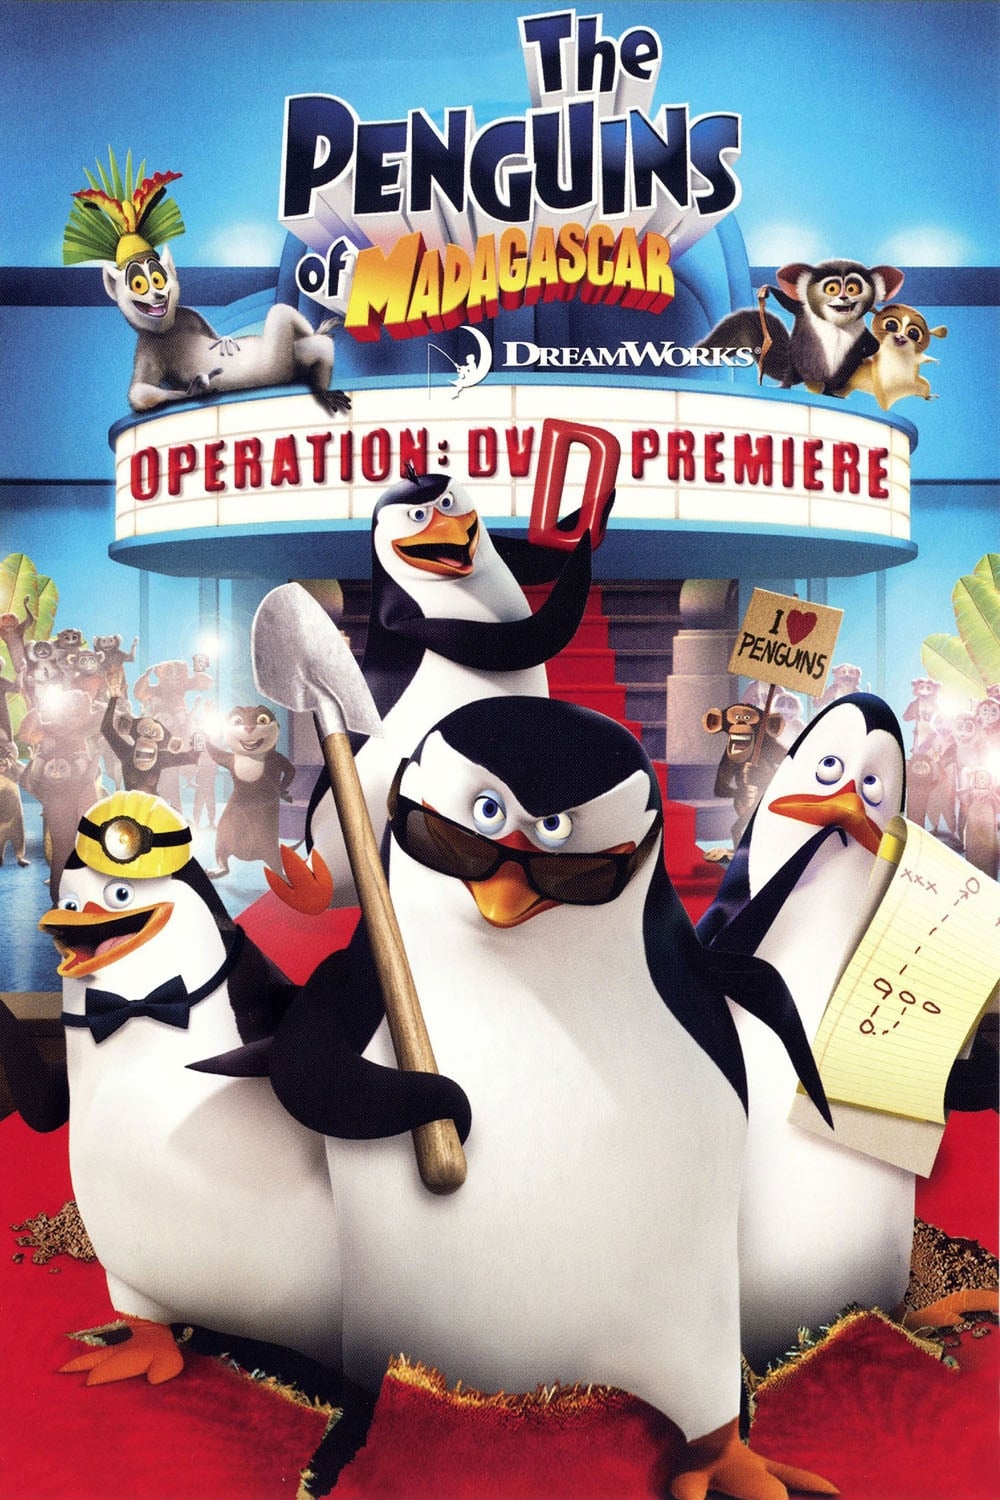 The Penguins of Madagascar: Operation DVD Premiere (2010)